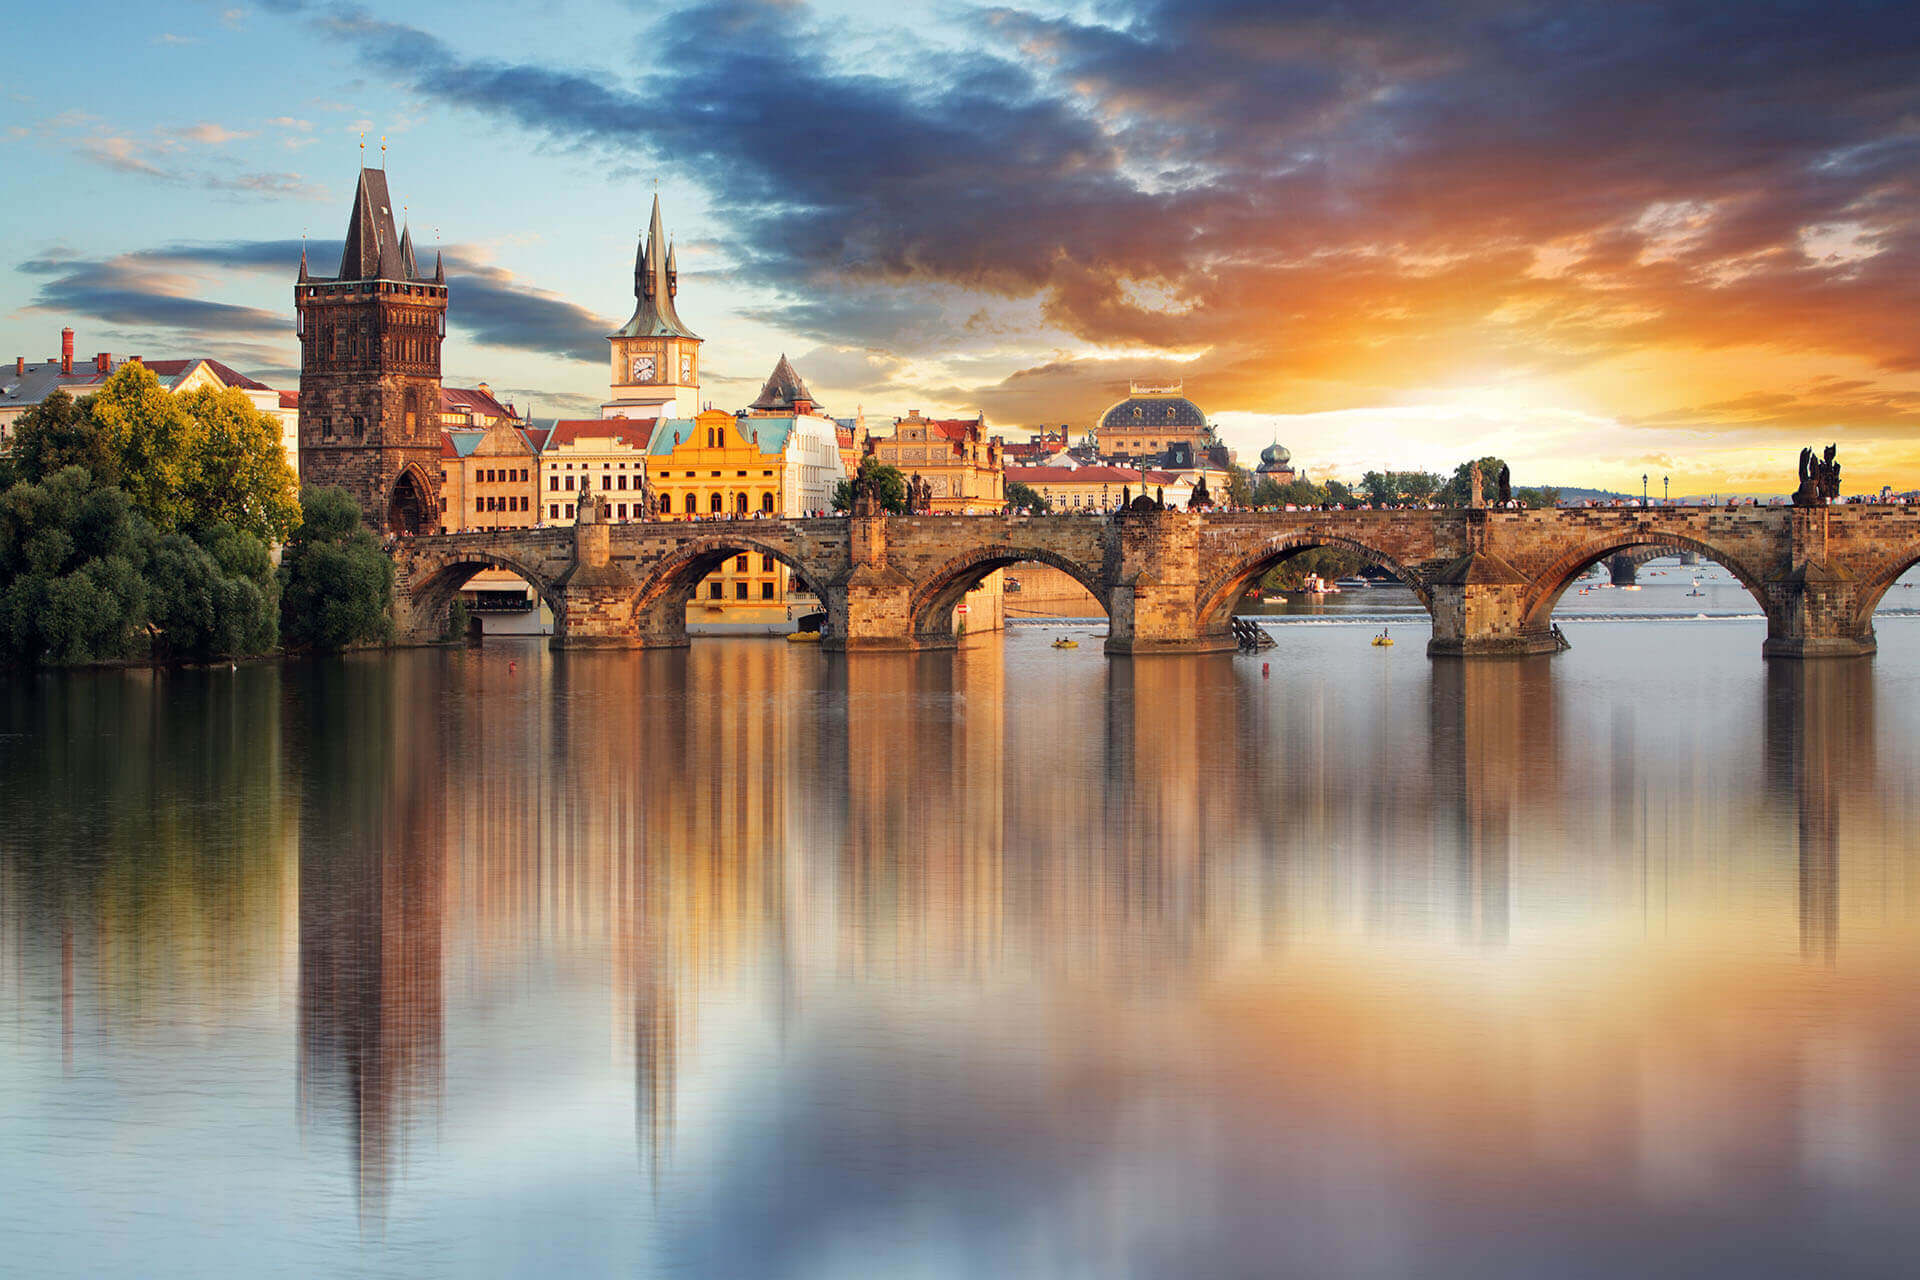 Czech Republic: Updated Entrance Requirements for Short-Term Travelers